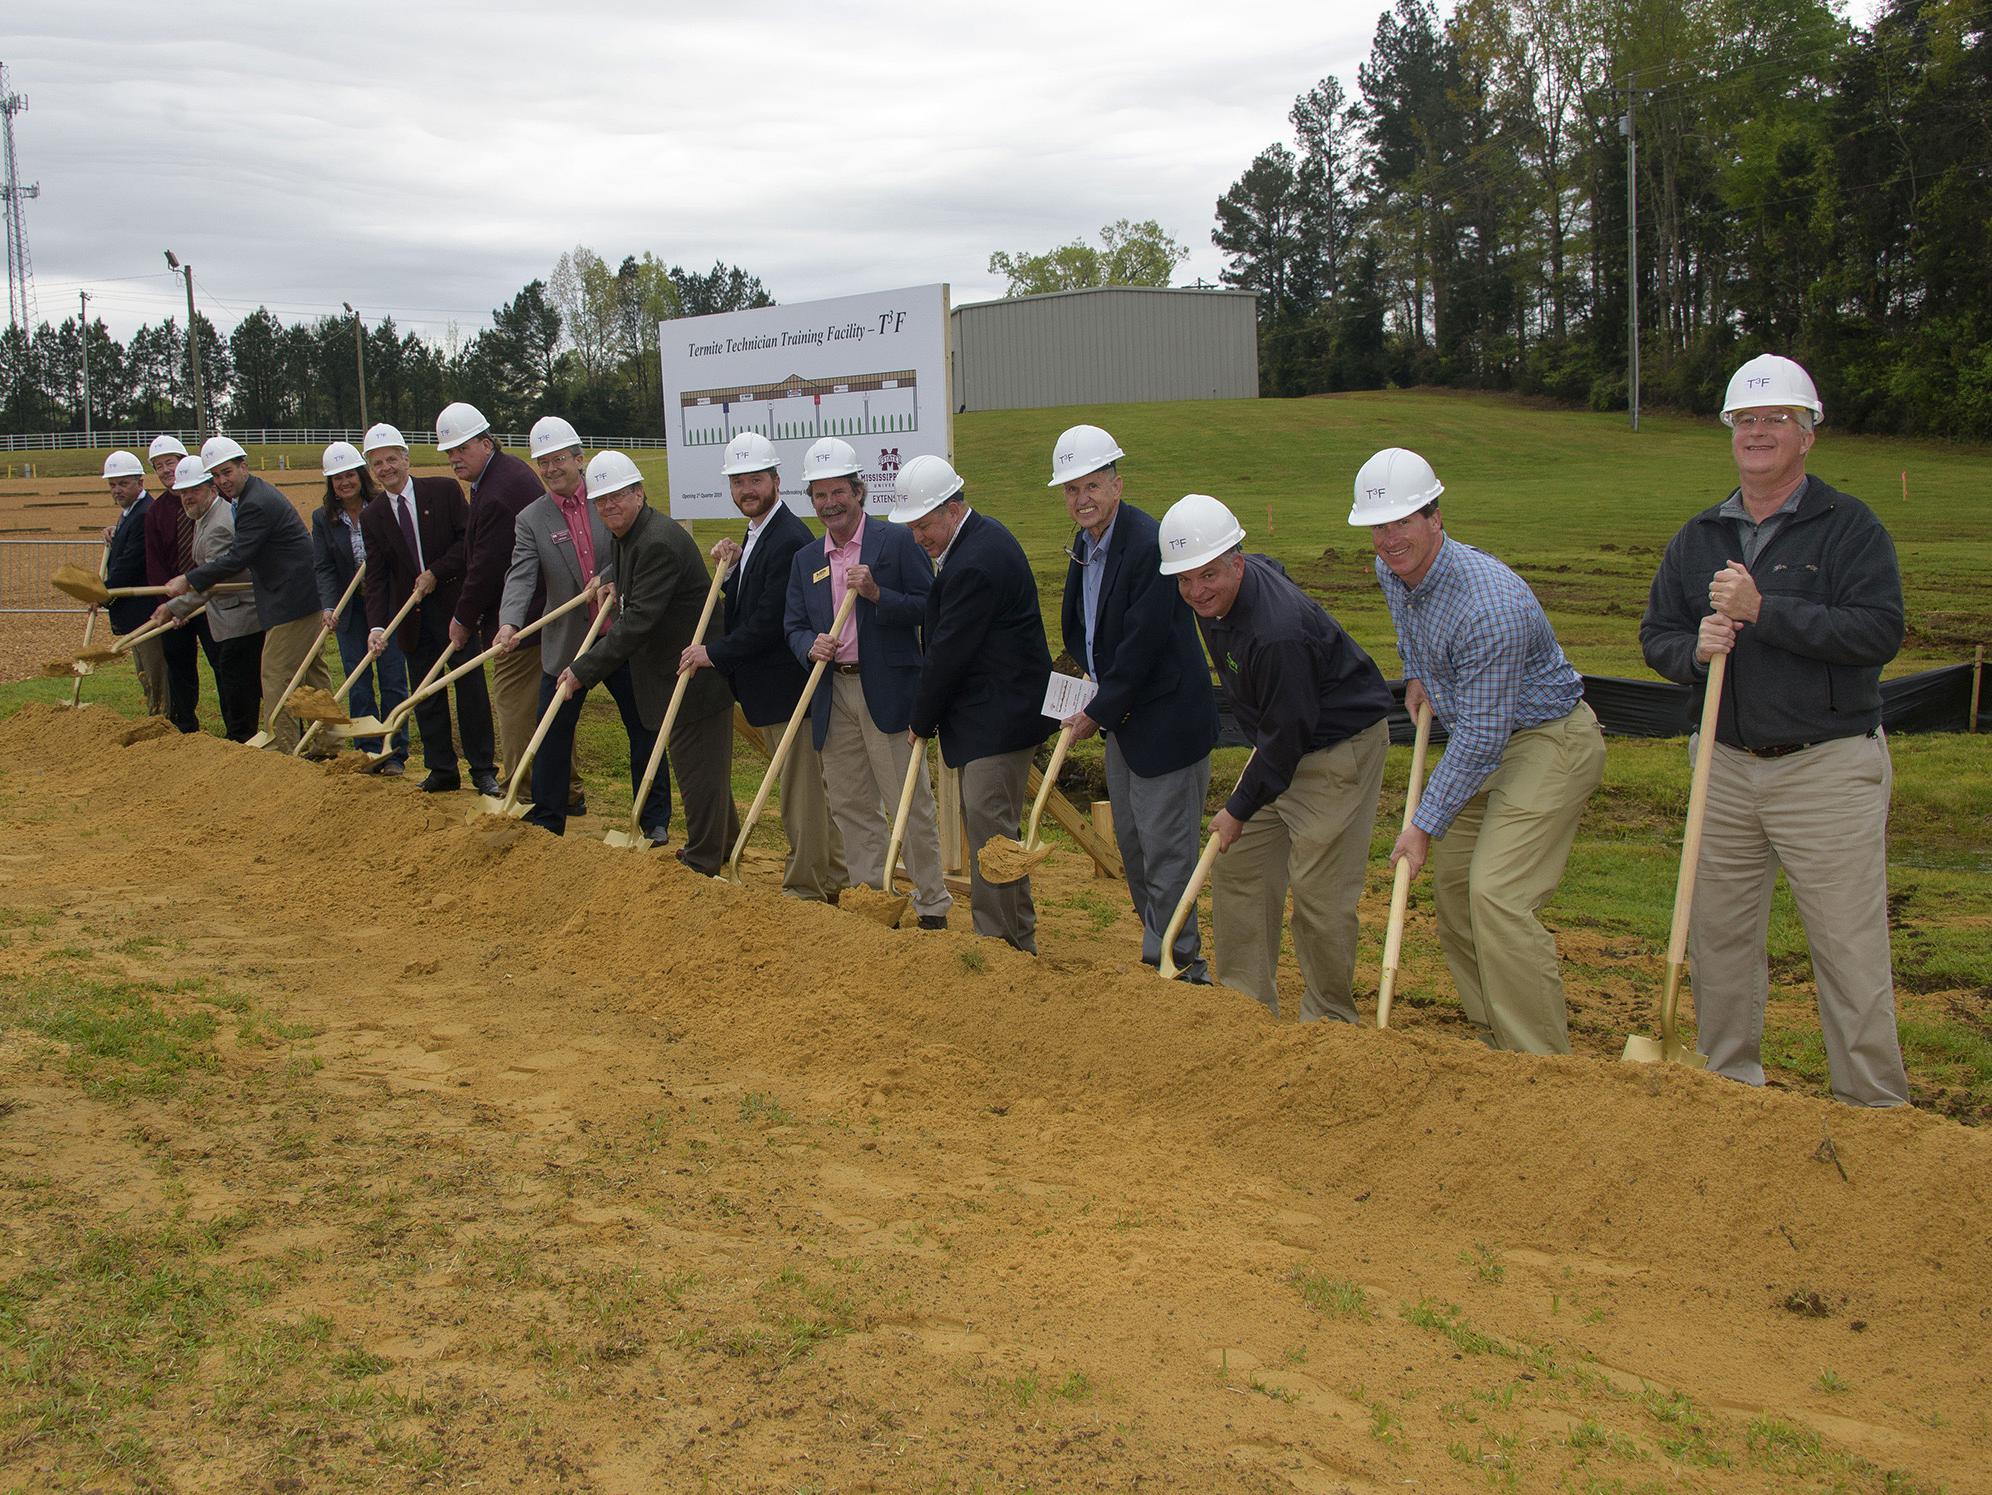 A group of more than a dozen people in hard hats break ground with shovels.